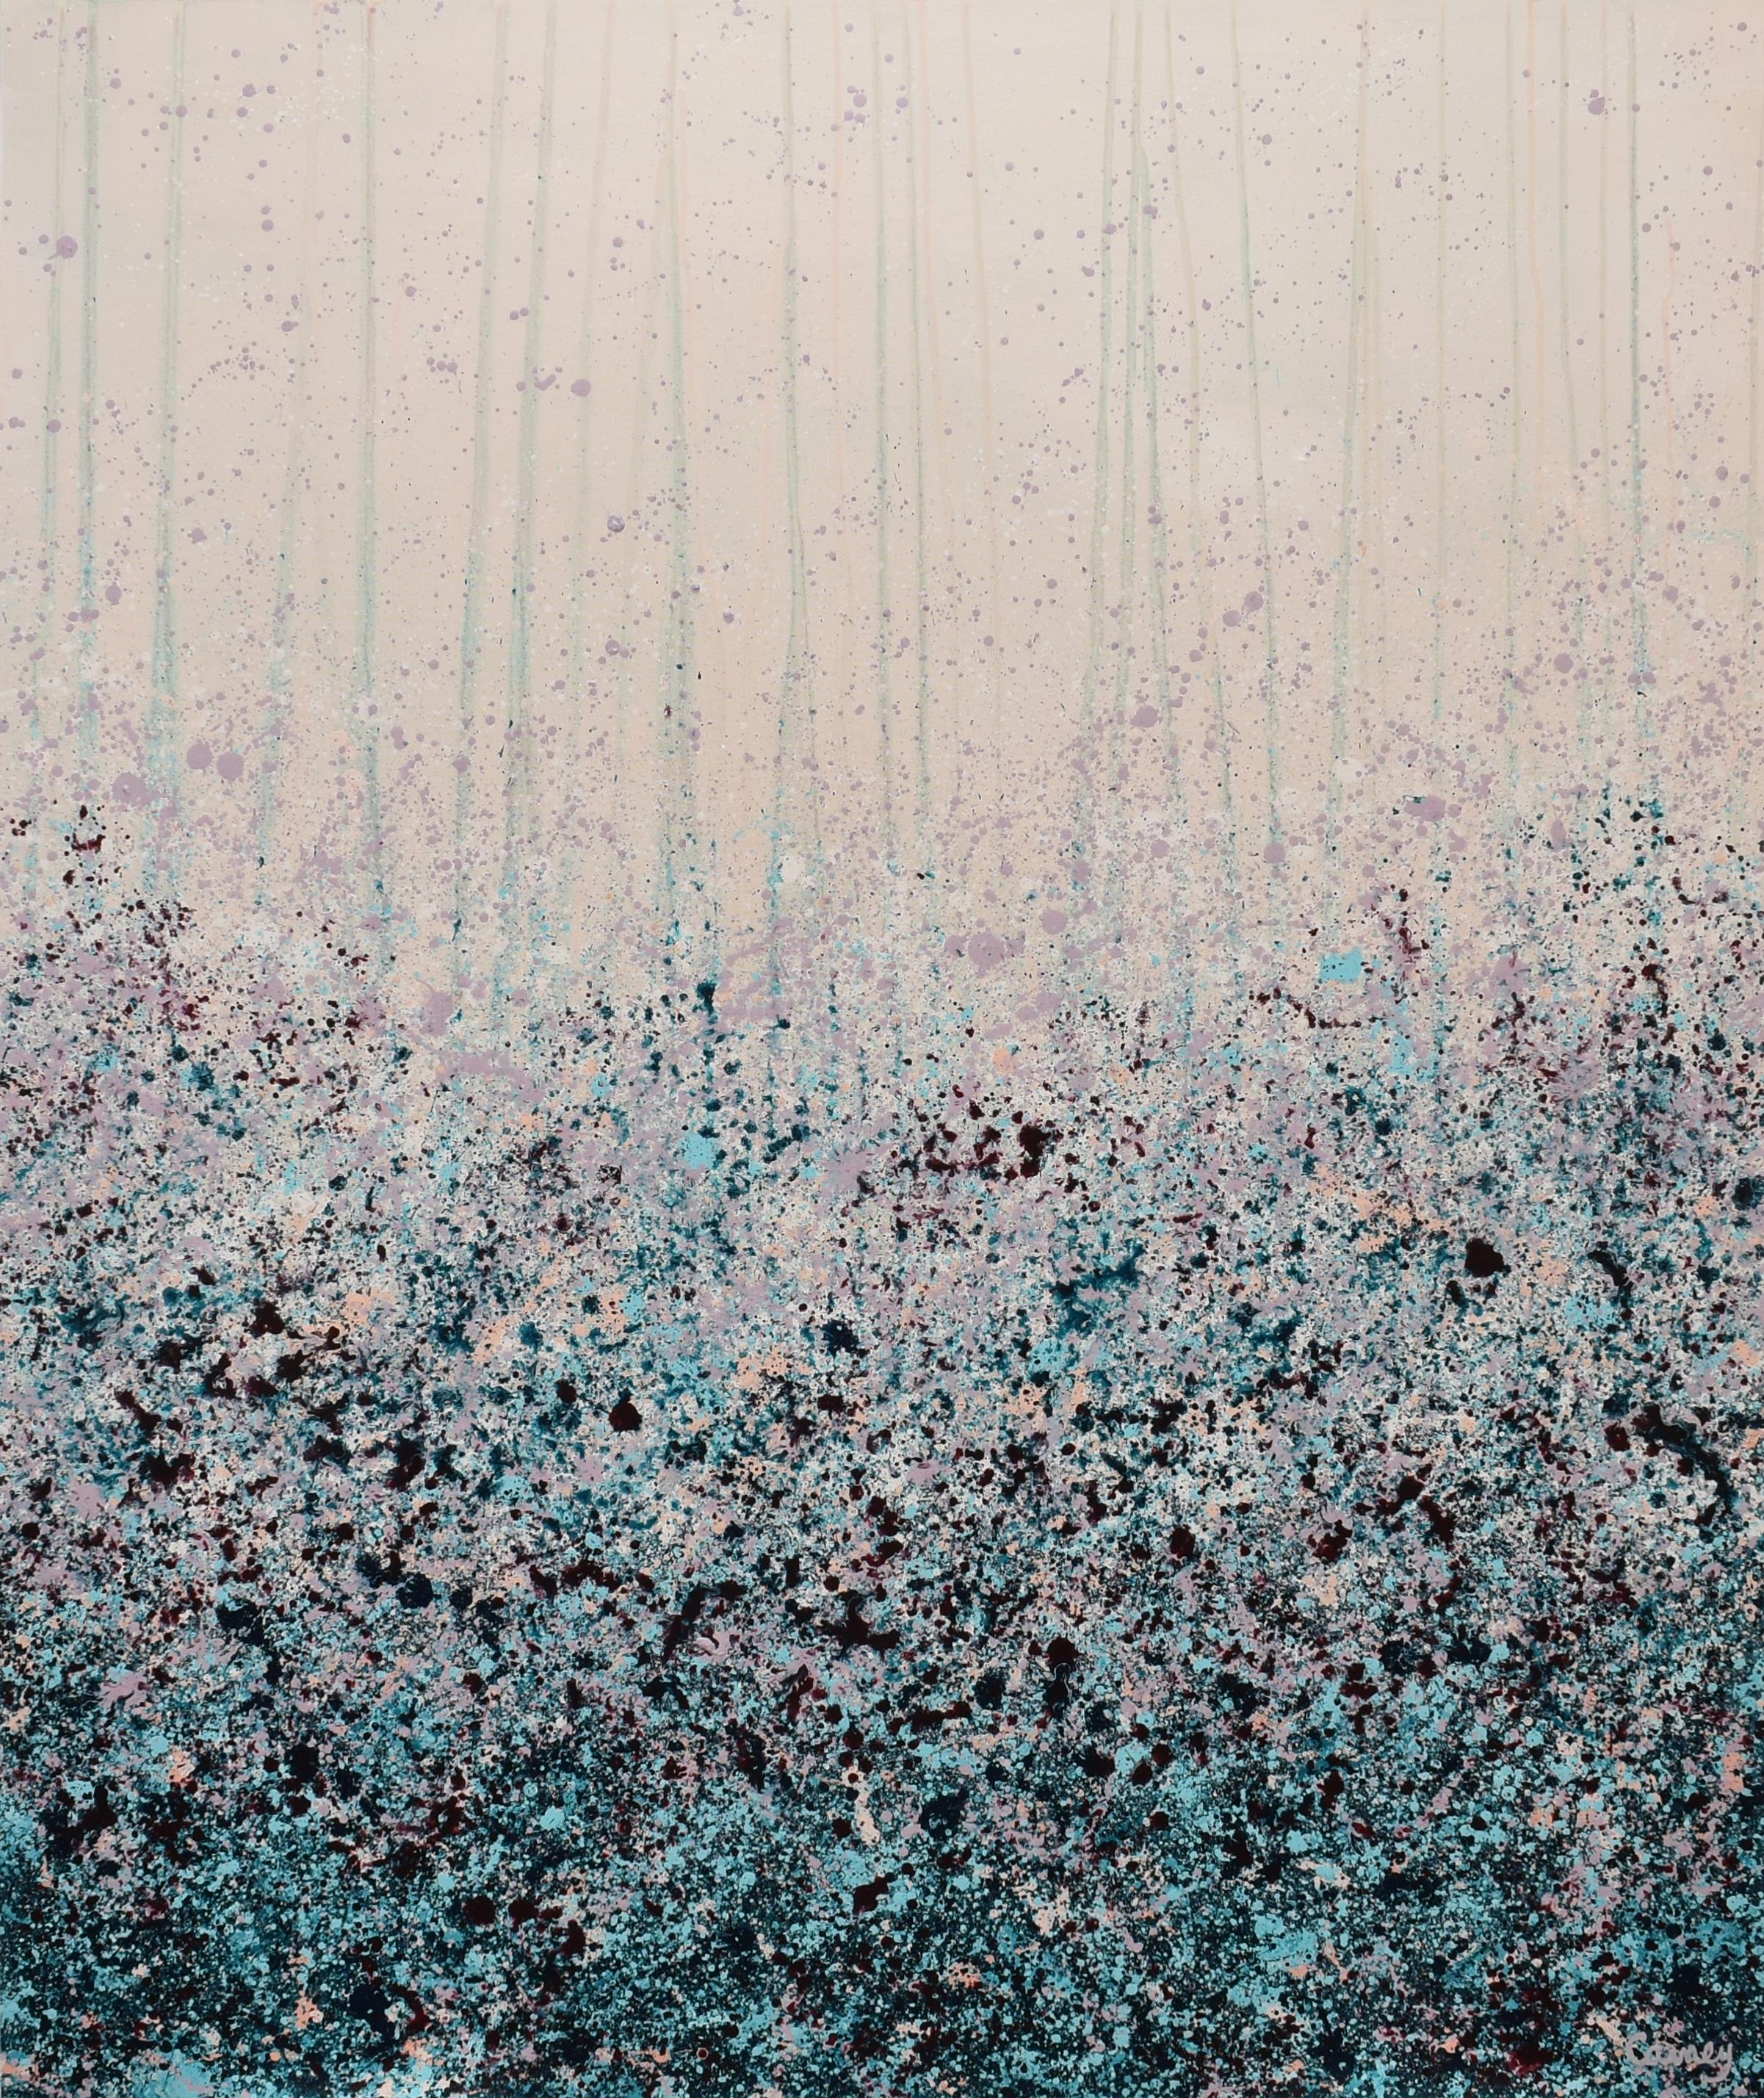 <p>Artist Comments<br>Artist Lisa Carney expresses an abstract floral piece with glorious pops of teal and mauve. She depicts a dramatic lush garden in cool refreshing hues. Wildflower-covered fields and sea corals sprawl the mesmerizing